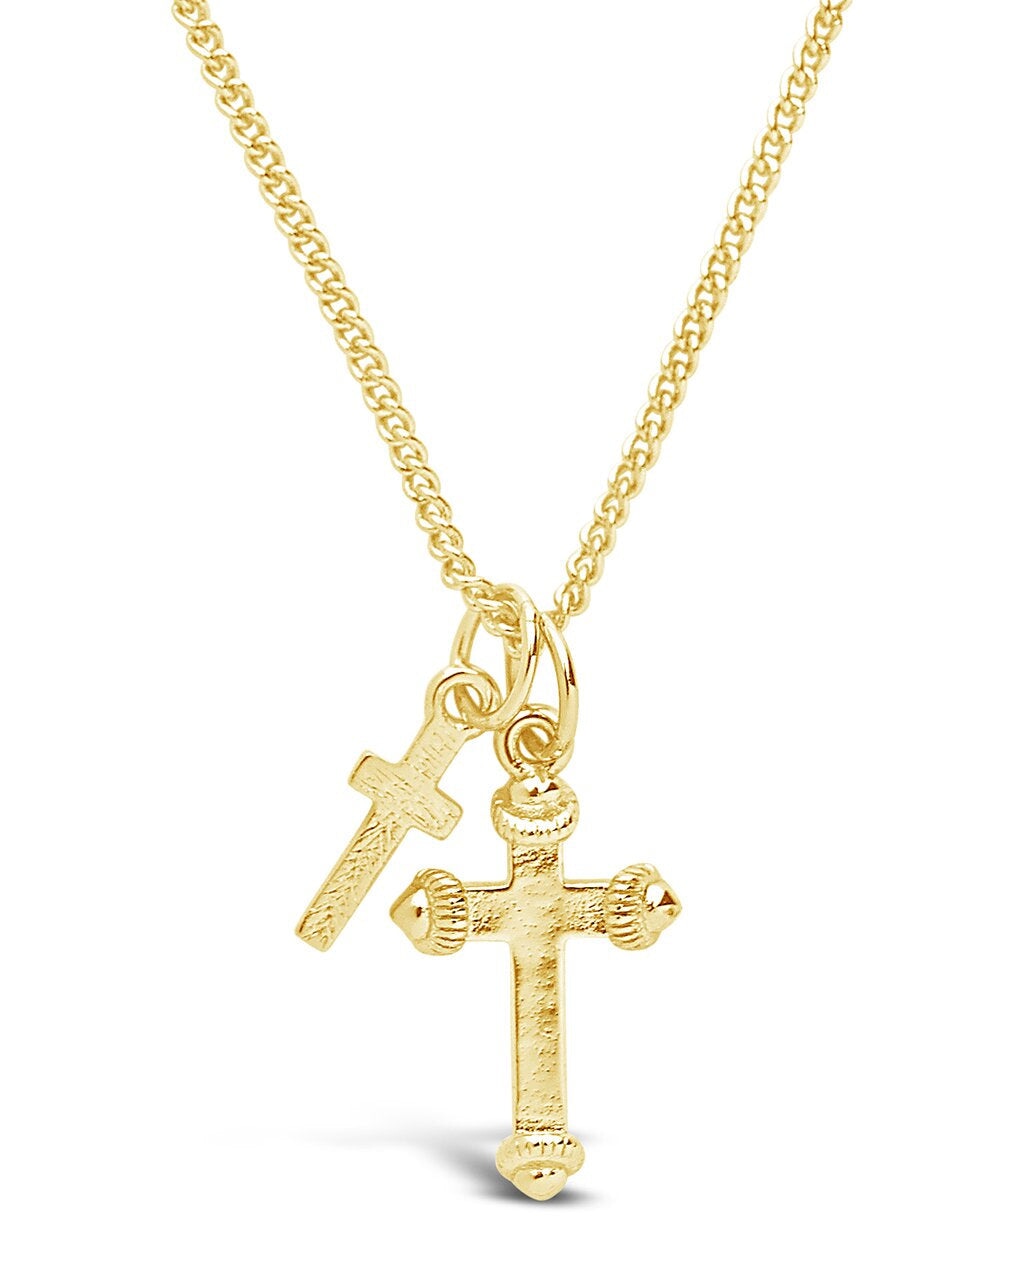 Men's Double Cross Pendant Necklace Necklace Sterling Forever Gold 